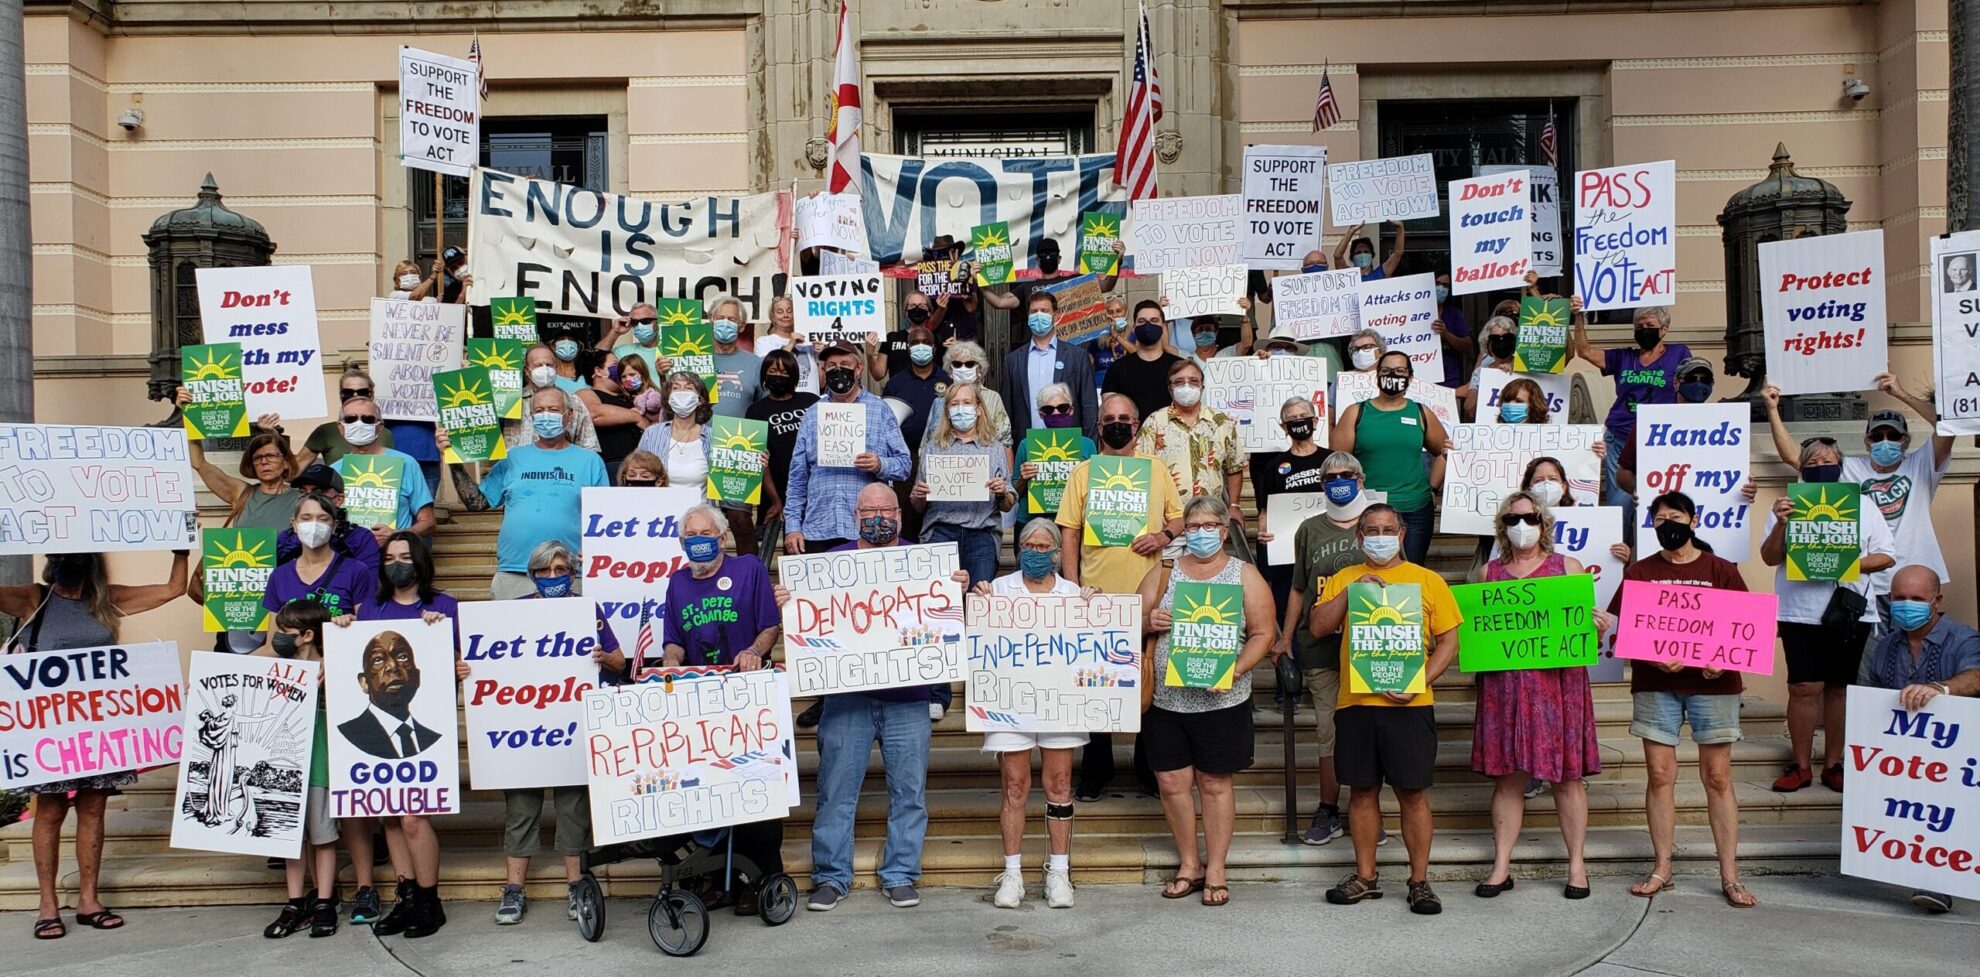 PDA/coalition activists rally in St Petersburg, FL for the Voting Rights Act, Sept. 17, 2021